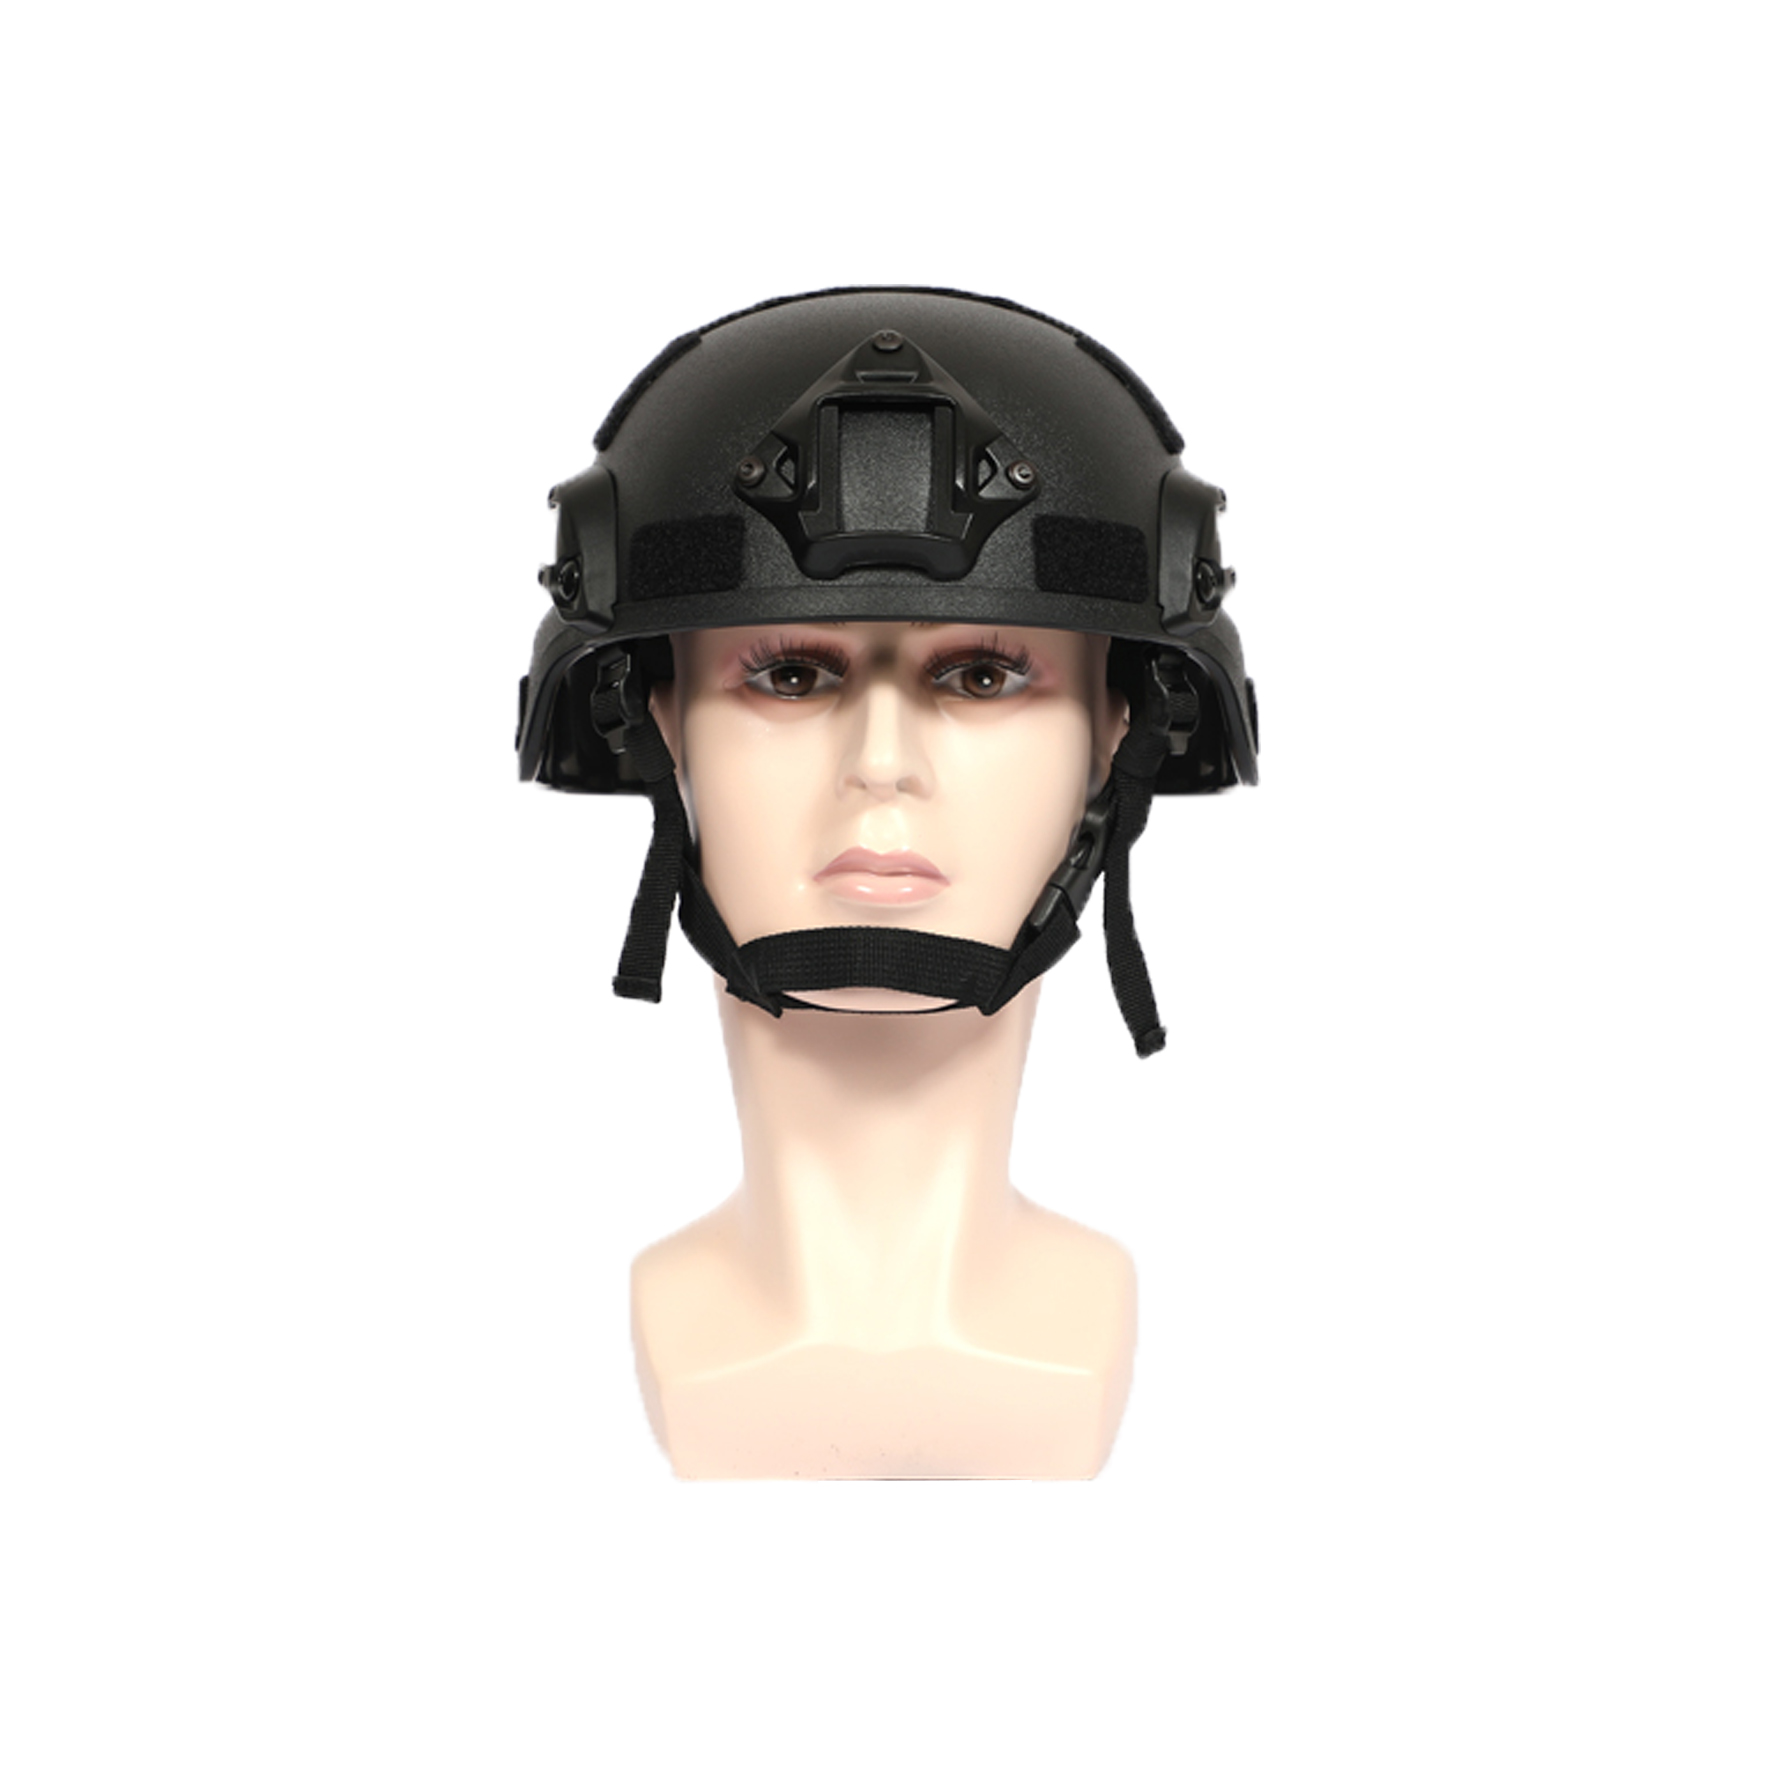 ABS Police Anti Riot Tactical MICH Helmet